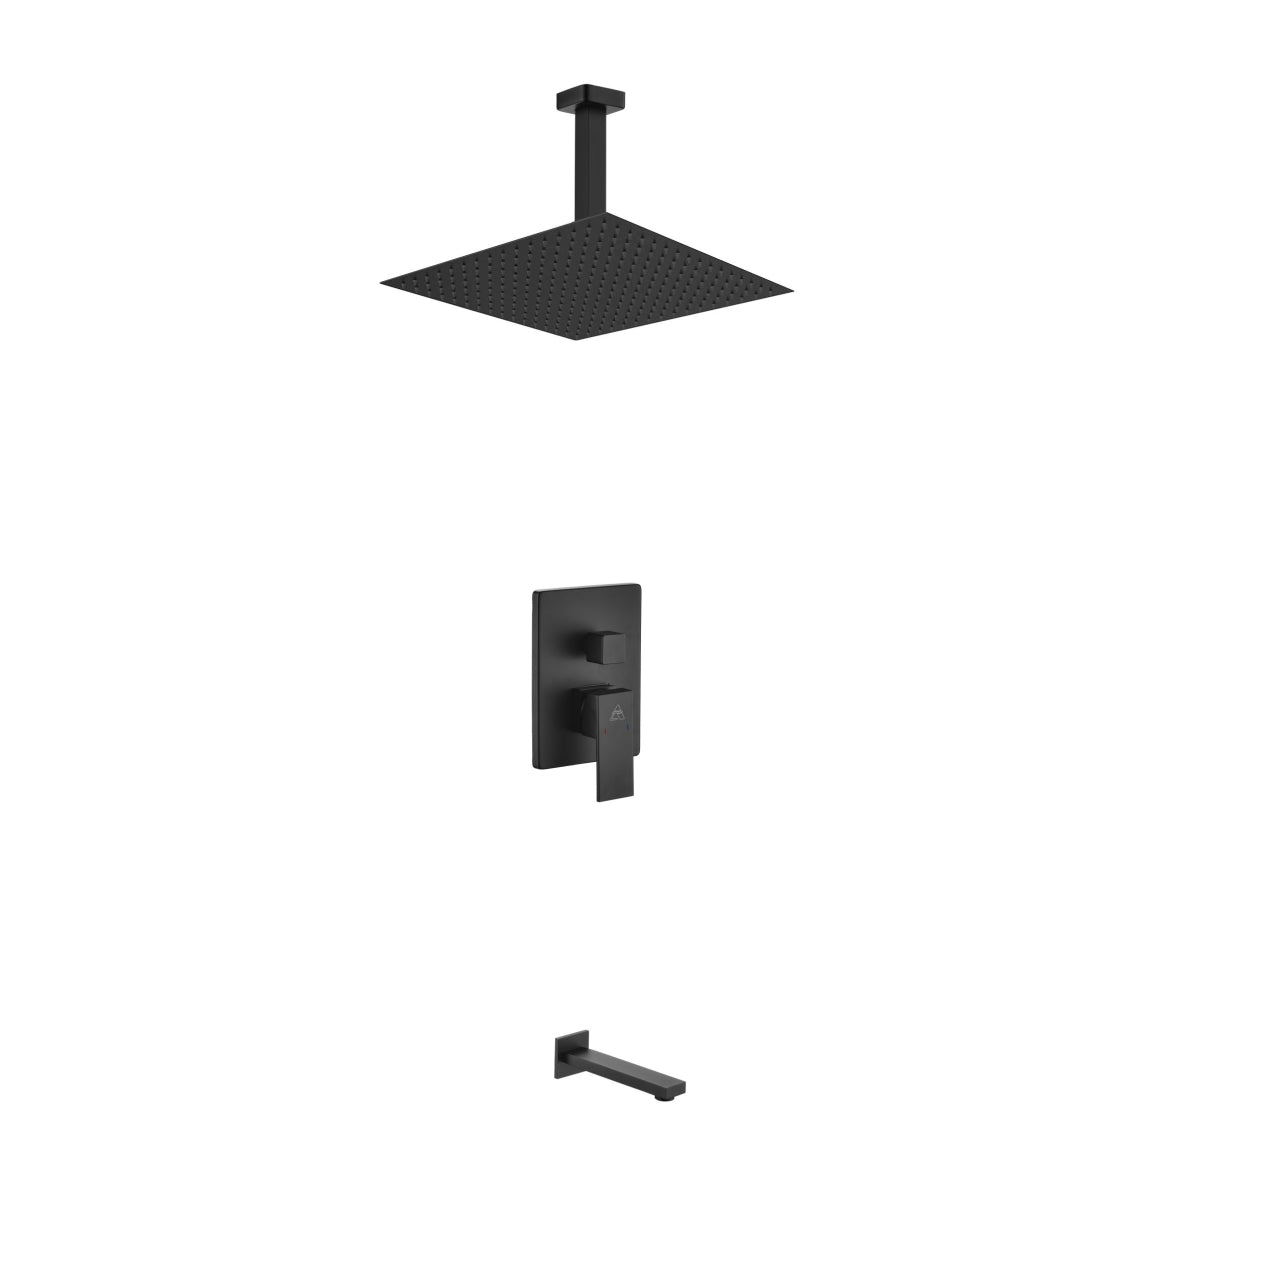 Kube Bath Aqua Piazza Black Shower Set With 12" Ceiling Mount Square Rain Shower and Tub Filler